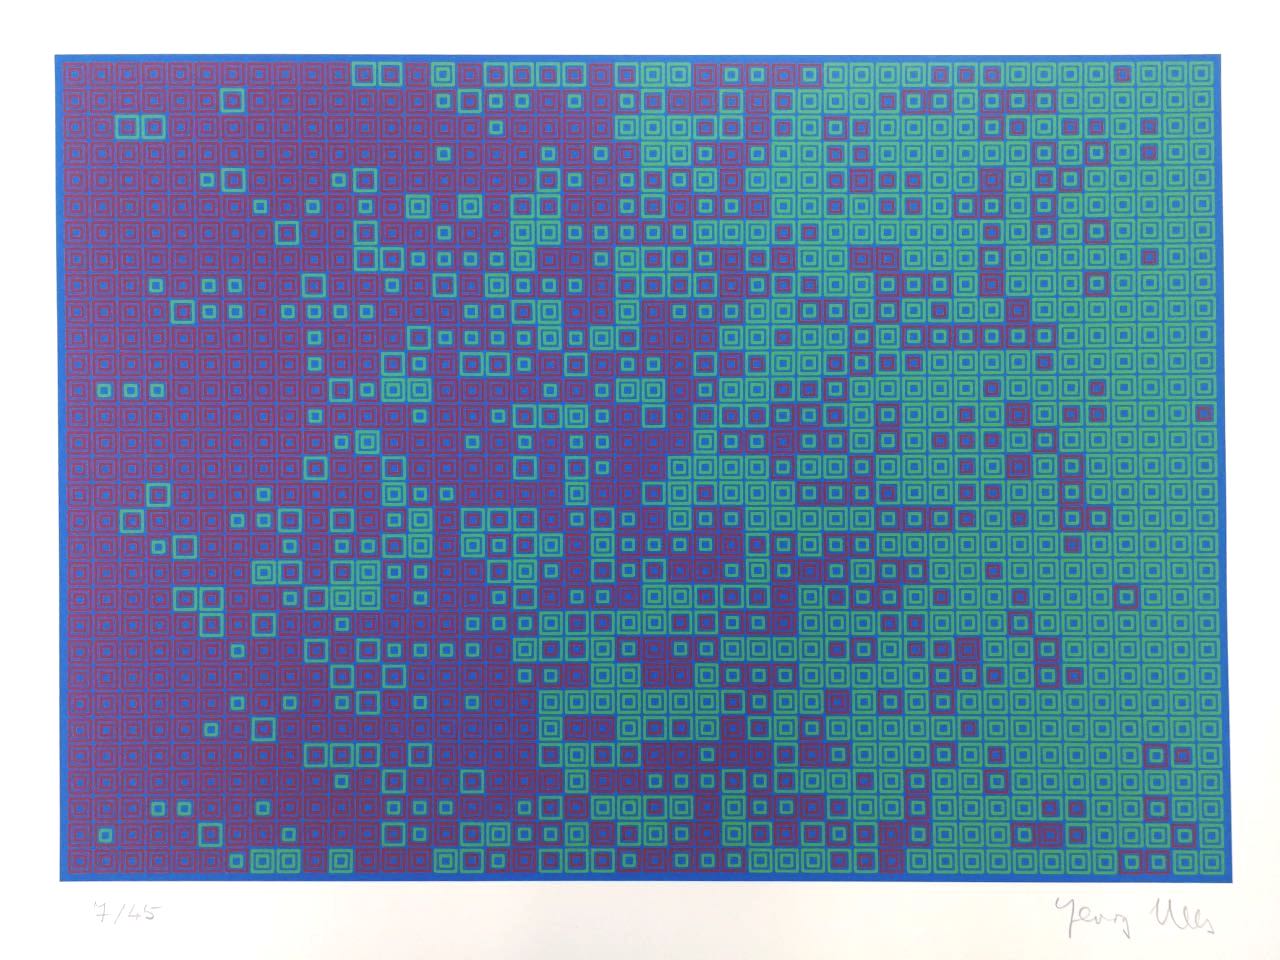 Georg Nees, Untitled, silkscreen, 38 x 50 cm (size of paper), edition of 45, 1972.